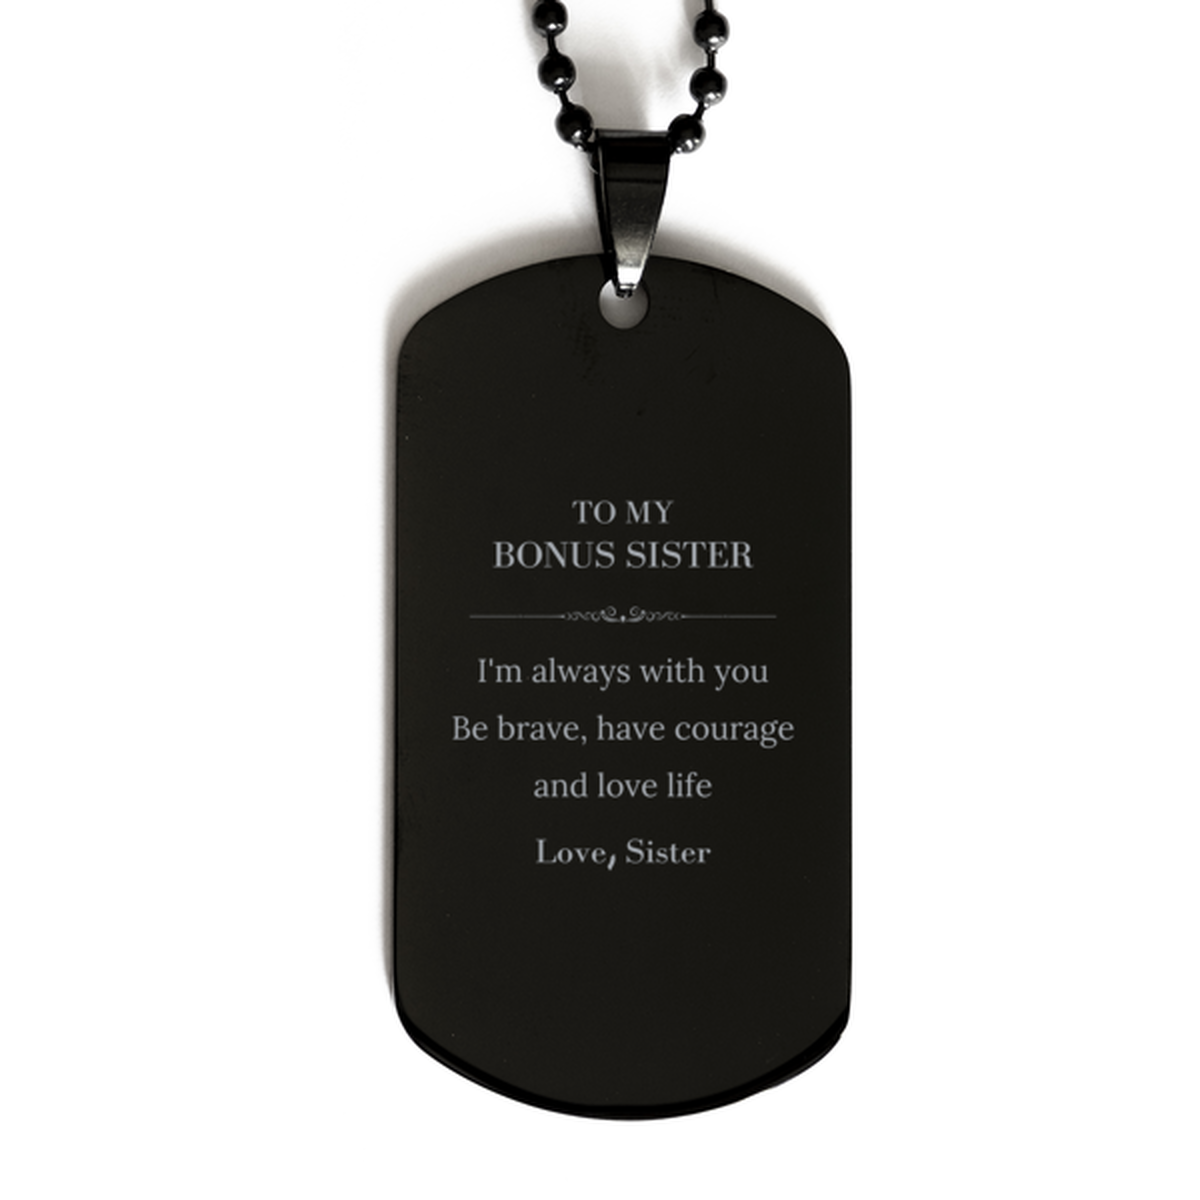 To My Bonus Sister Gifts from Sister, Unique Black Dog Tag Inspirational Christmas Birthday Graduation Gifts for Bonus Sister I'm always with you. Be brave, have courage and love life. Love, Sister